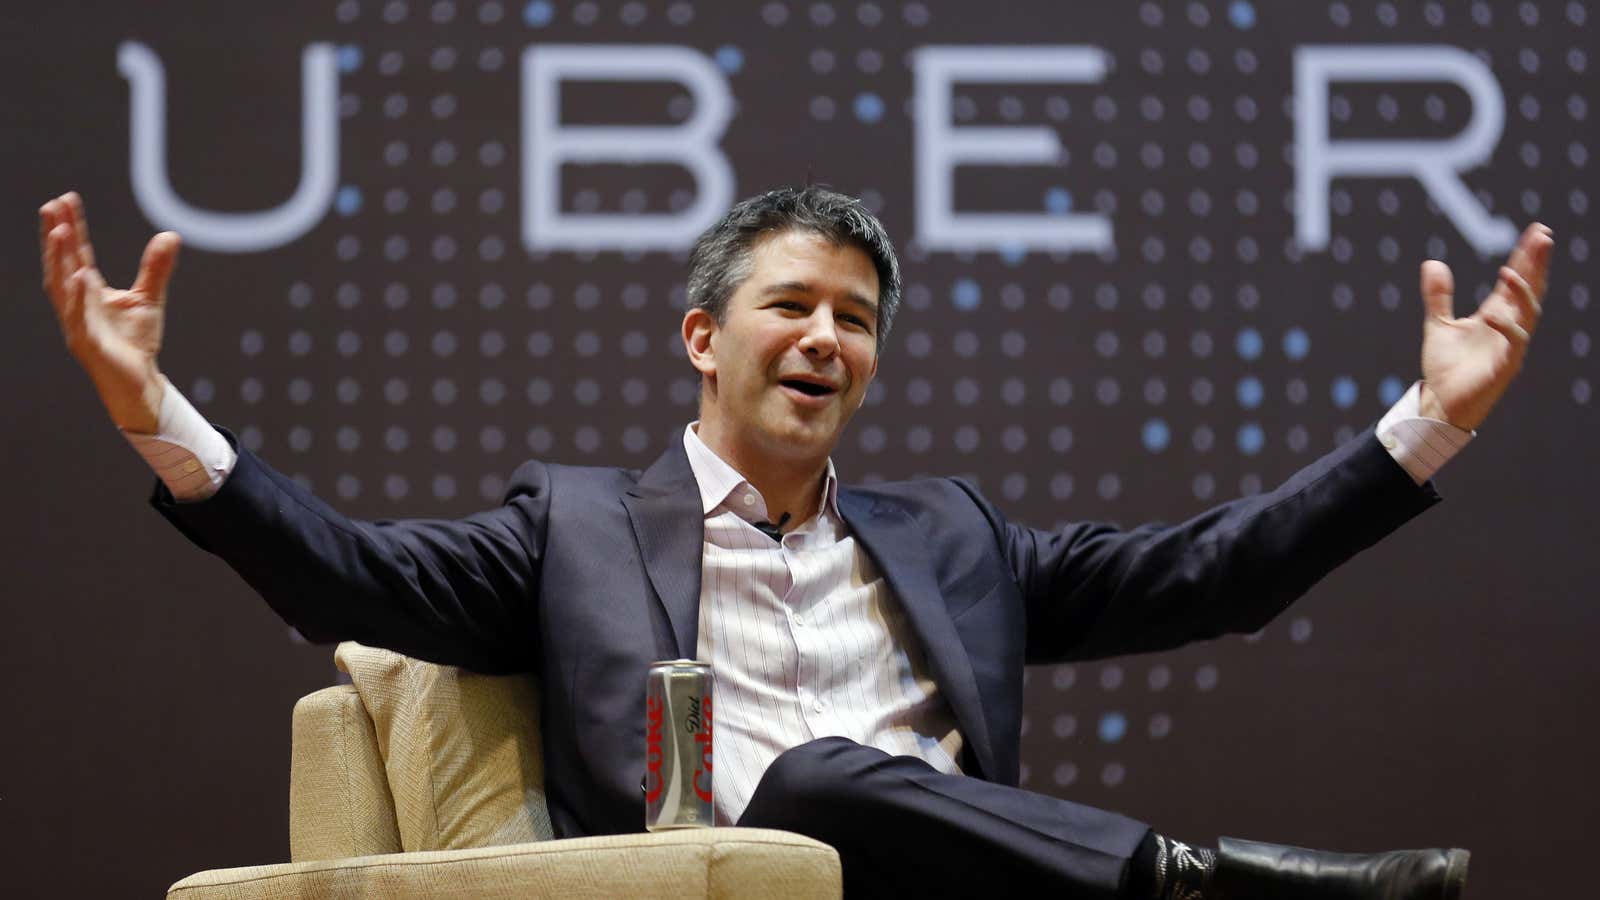 Uber co-founder and former CEO Travis Kalanick.